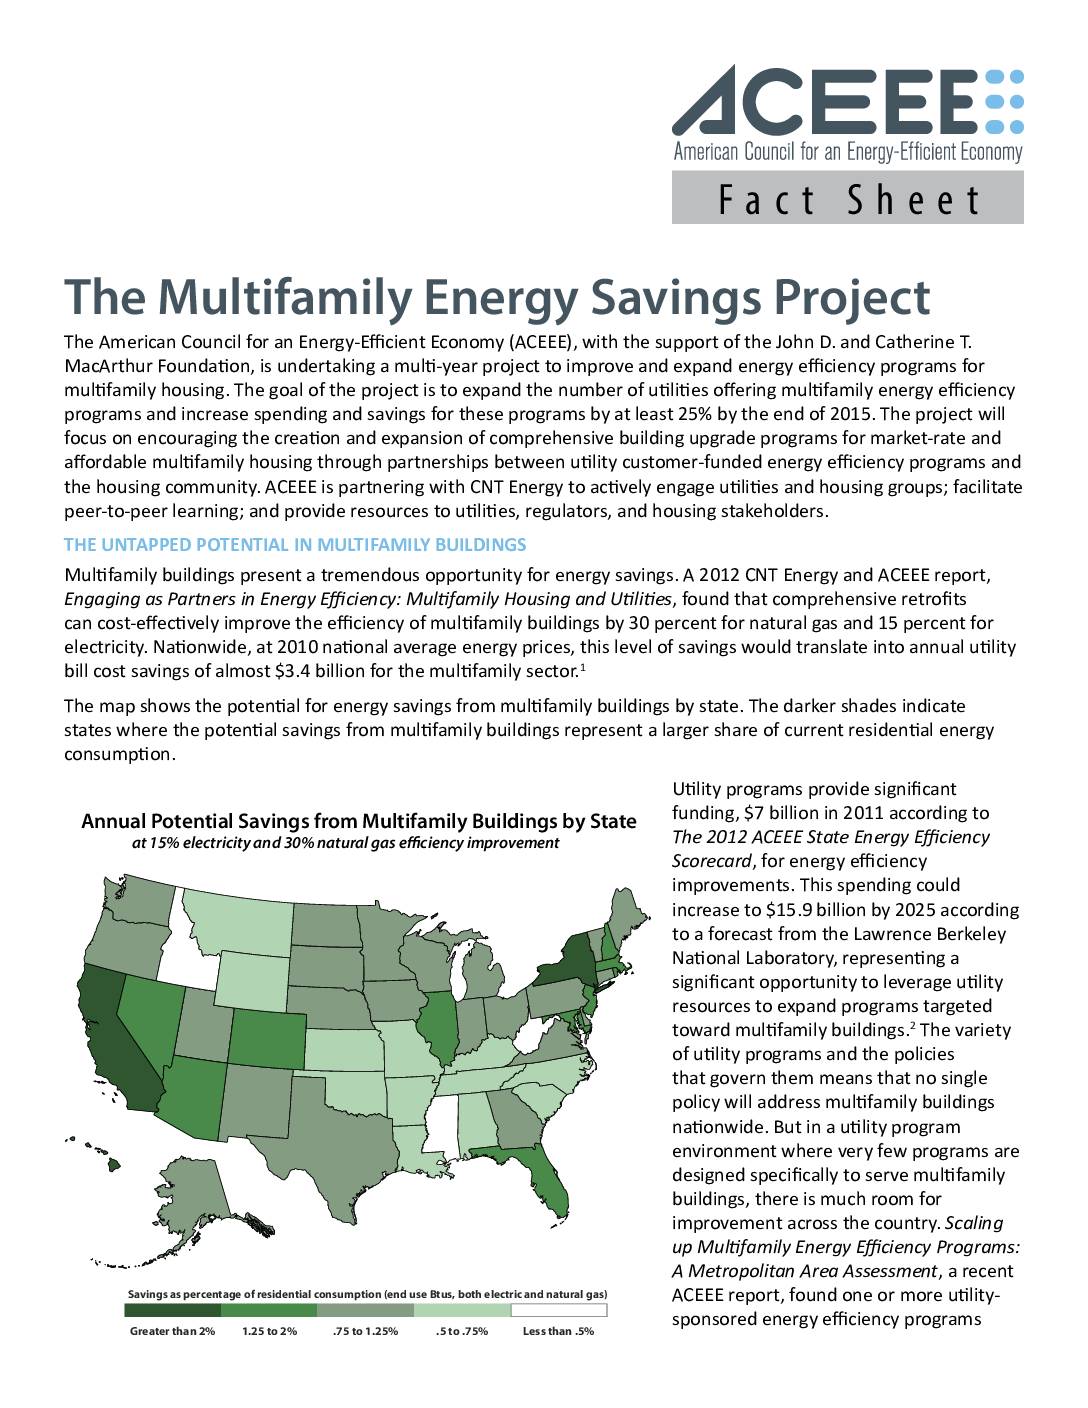 The Multifamily Energy Savings Project